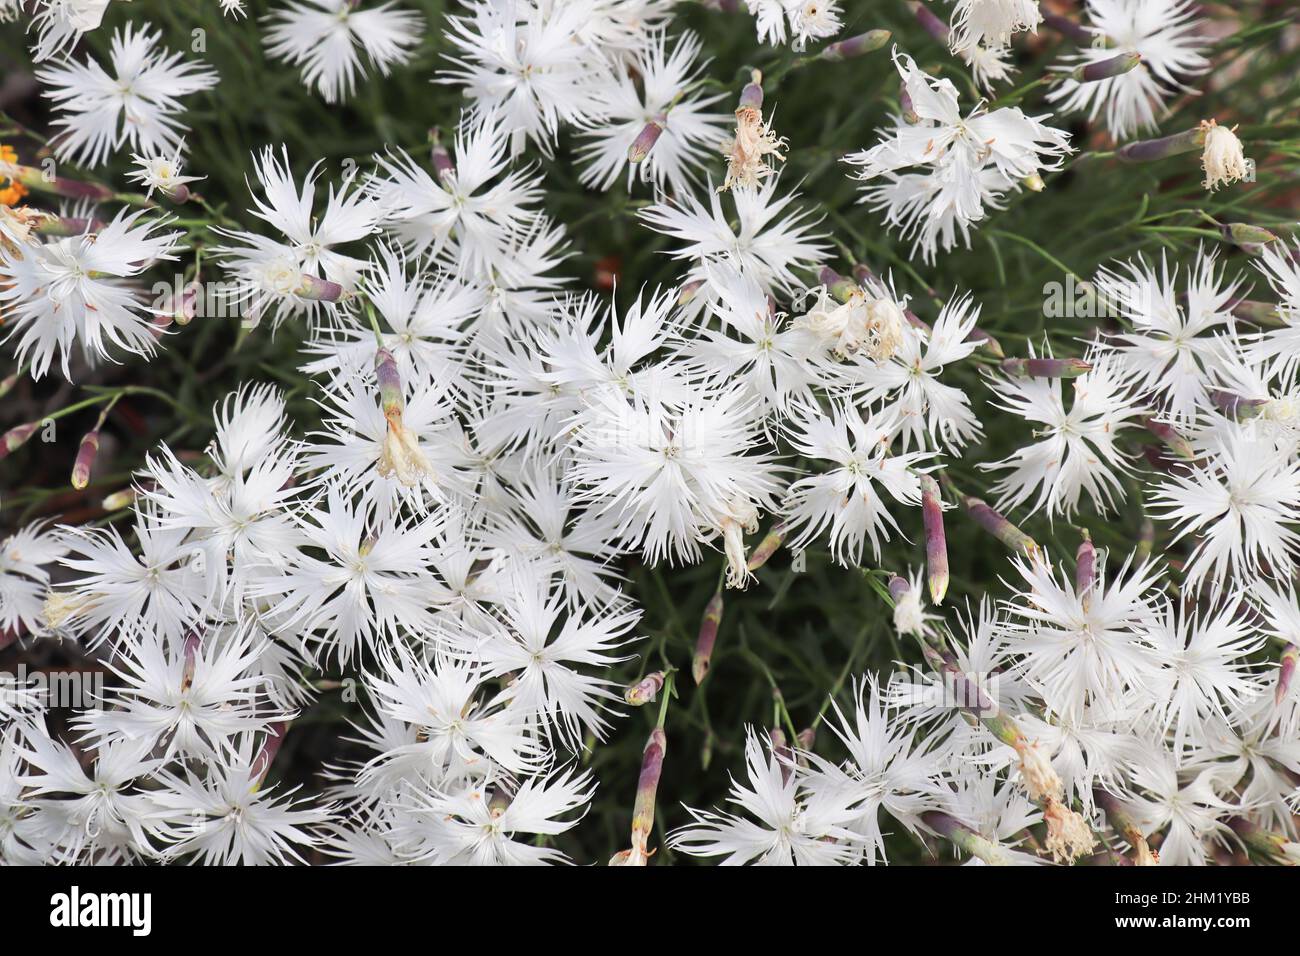 Closeup fo the white flowers on a dianthus plant Stock Photo